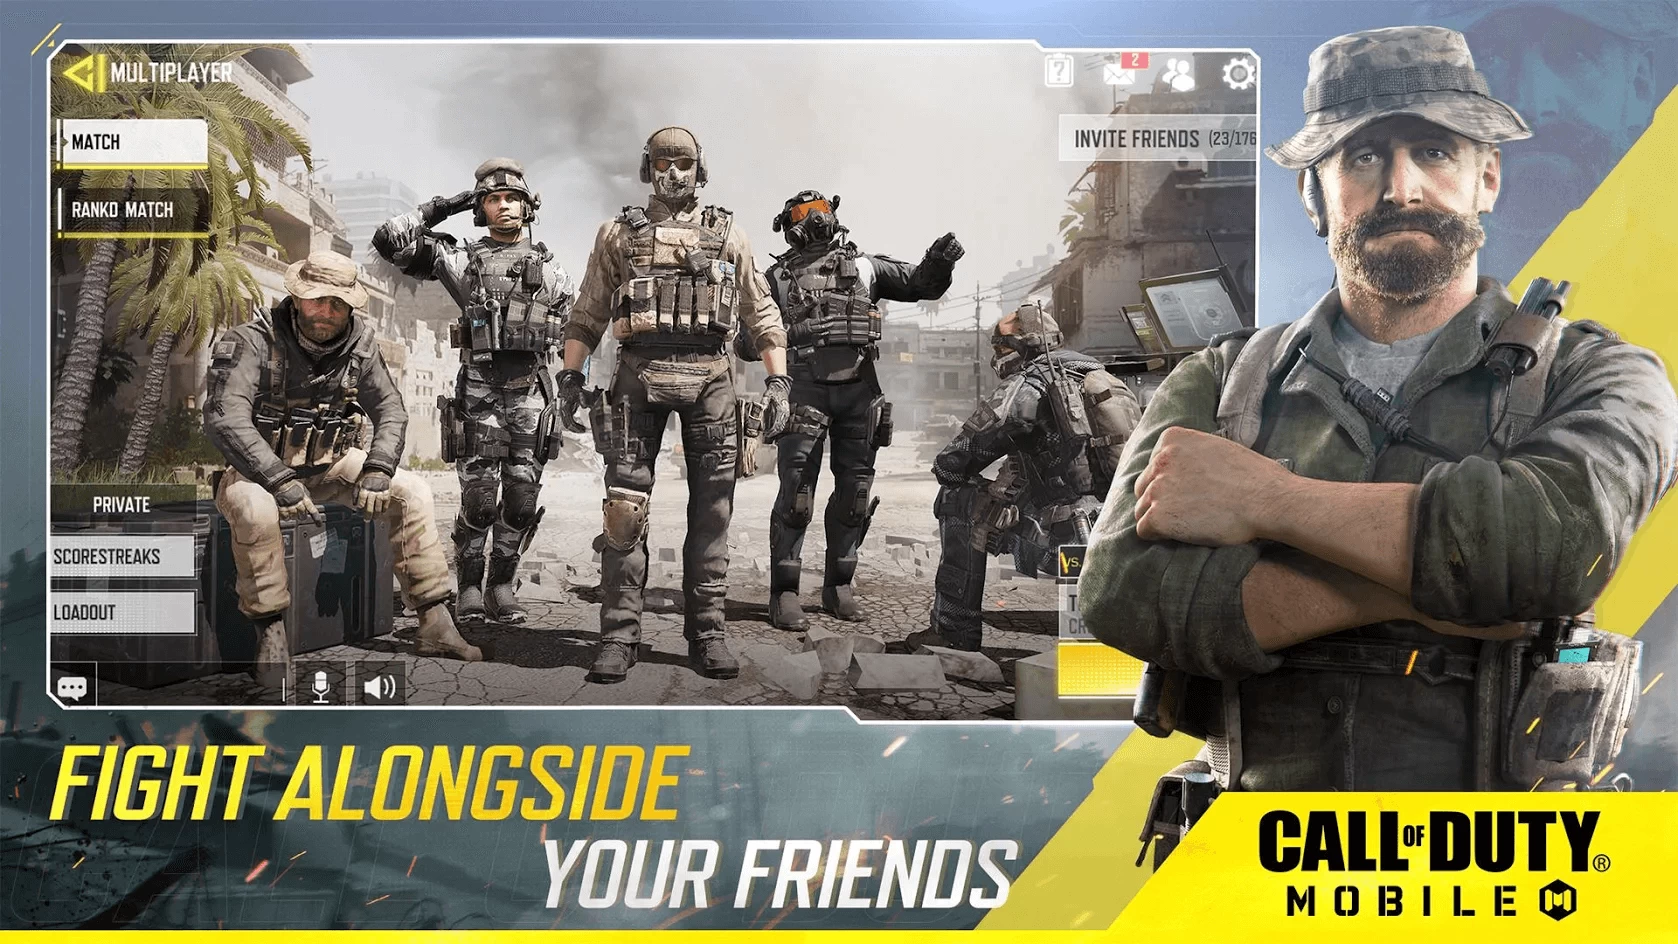 Call Of Duty Mobile Garenagameloop Mobile Android Games Emulator On Pc For Free Official Pubg Mobile Emulator